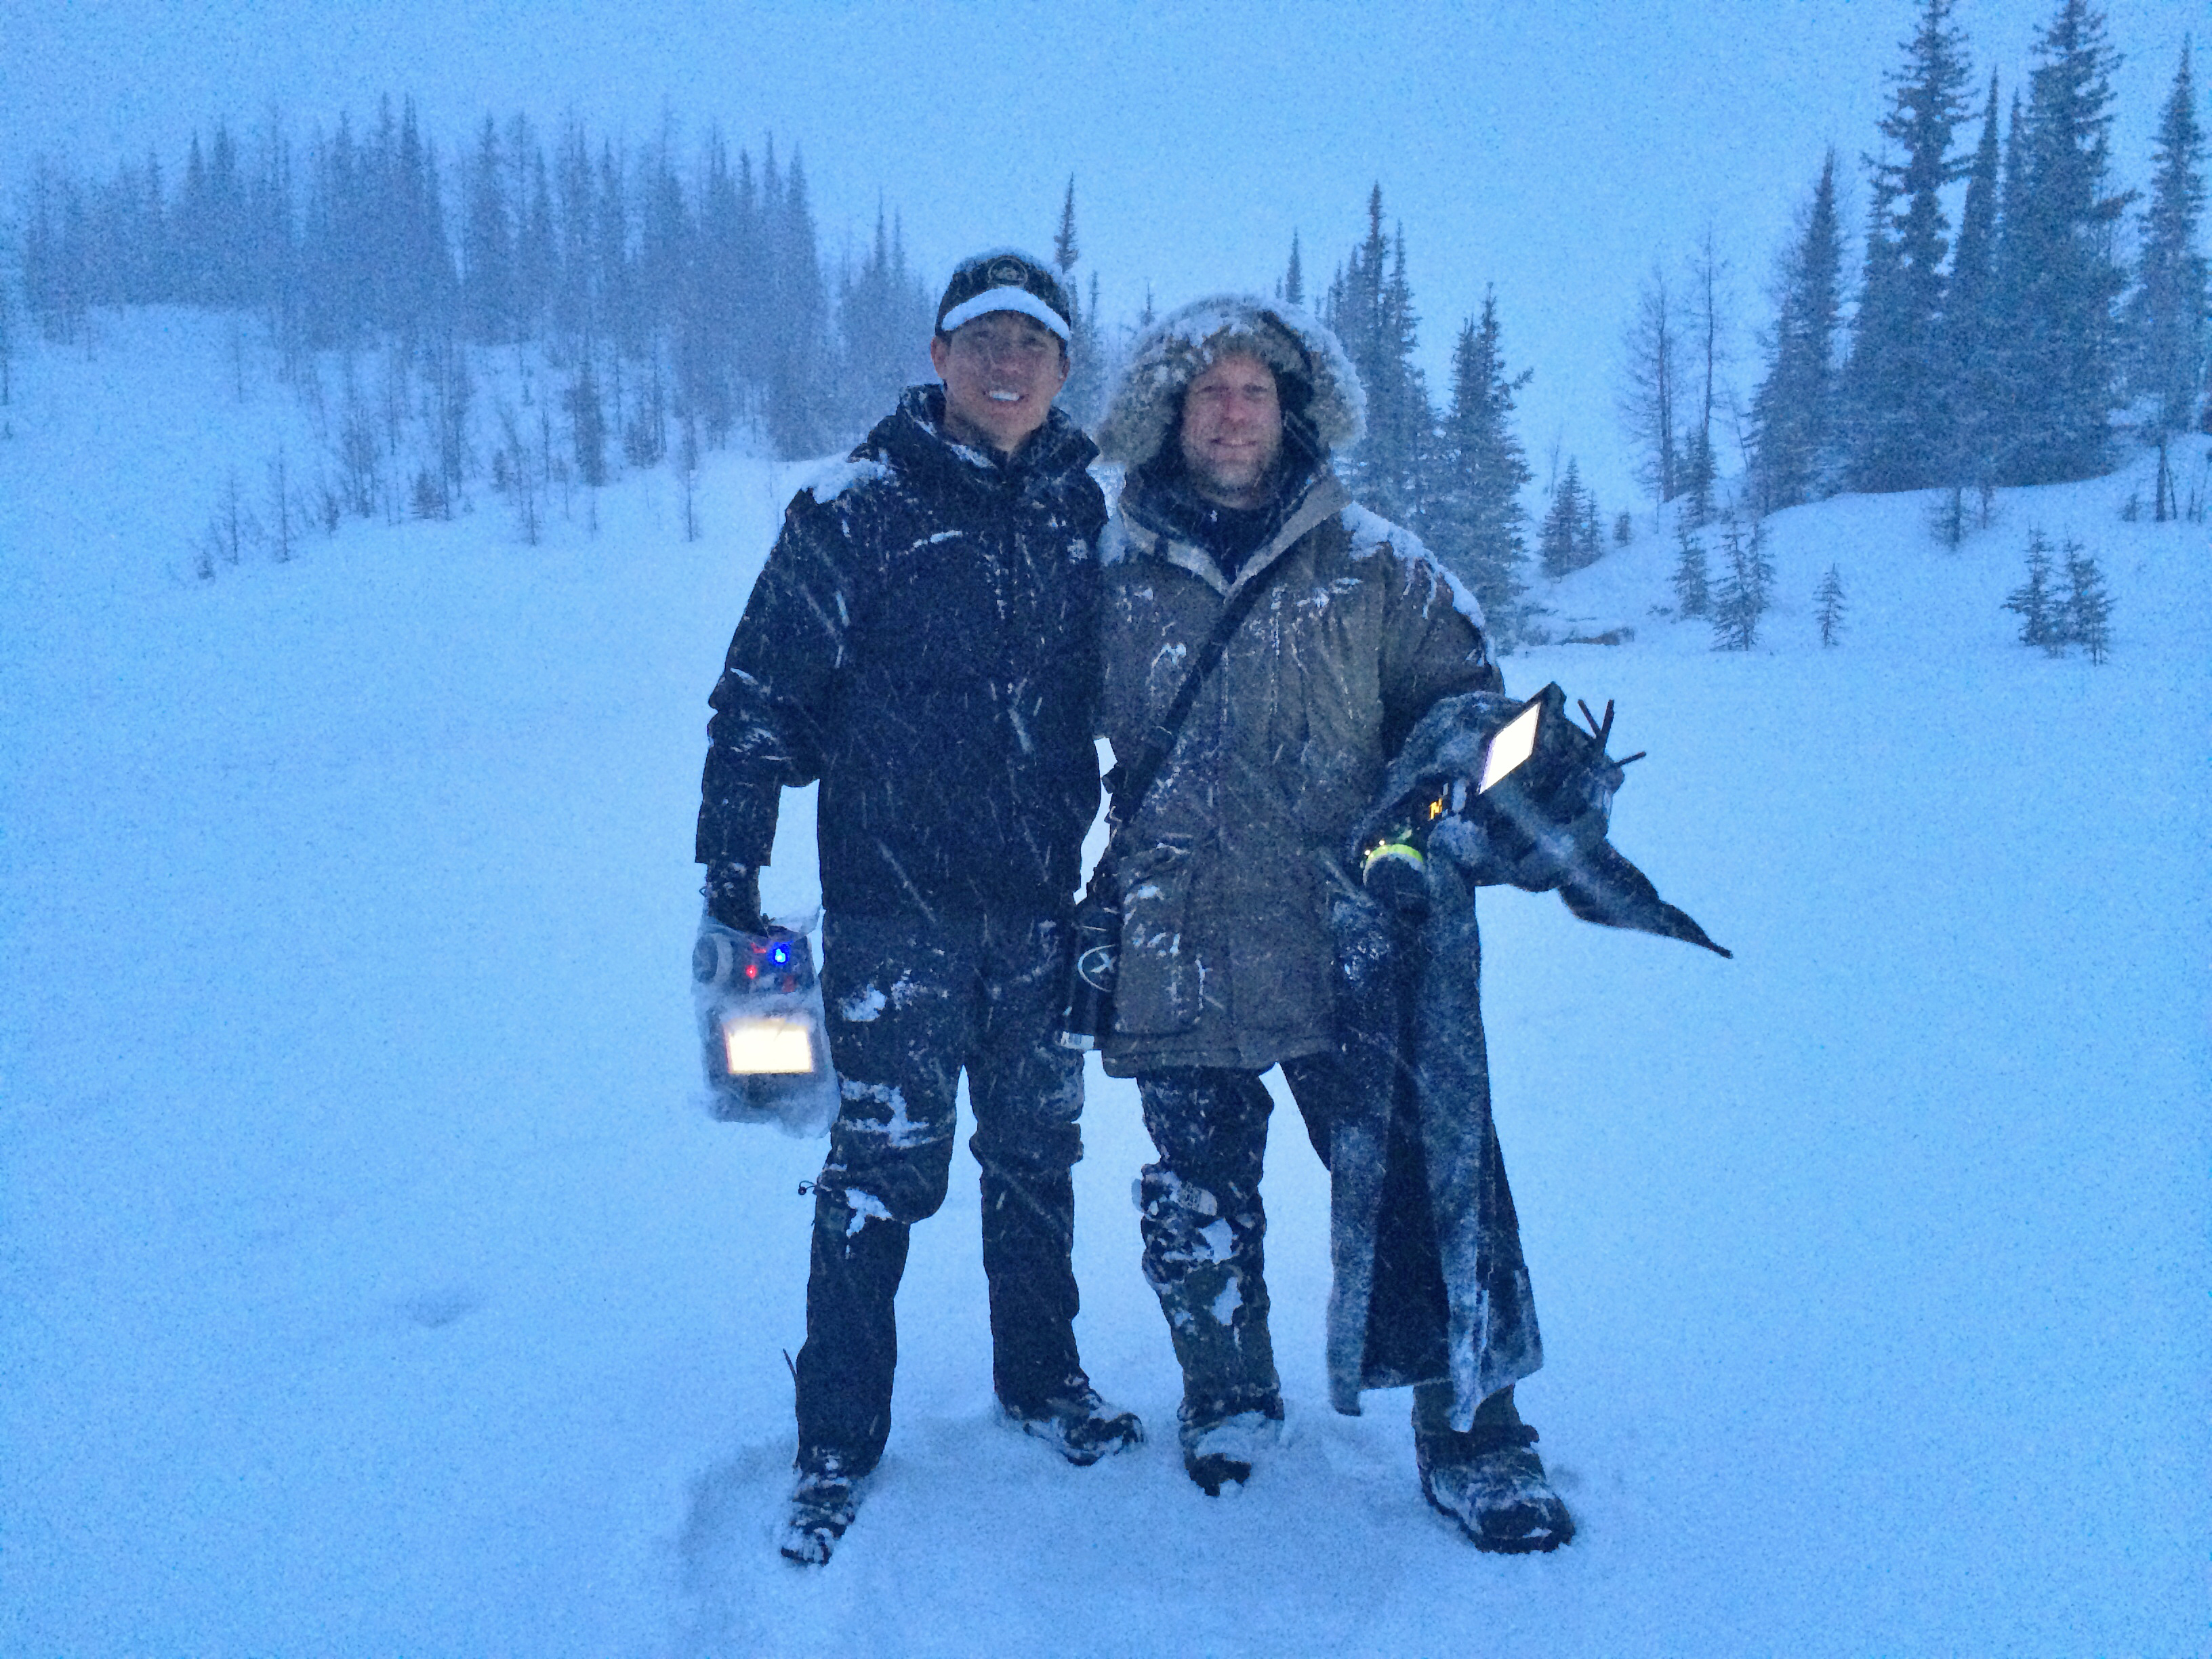 Members of Lubezki's team on The Revenant included DIT Arthur To and AC John T. Connor, here on location in Canada.